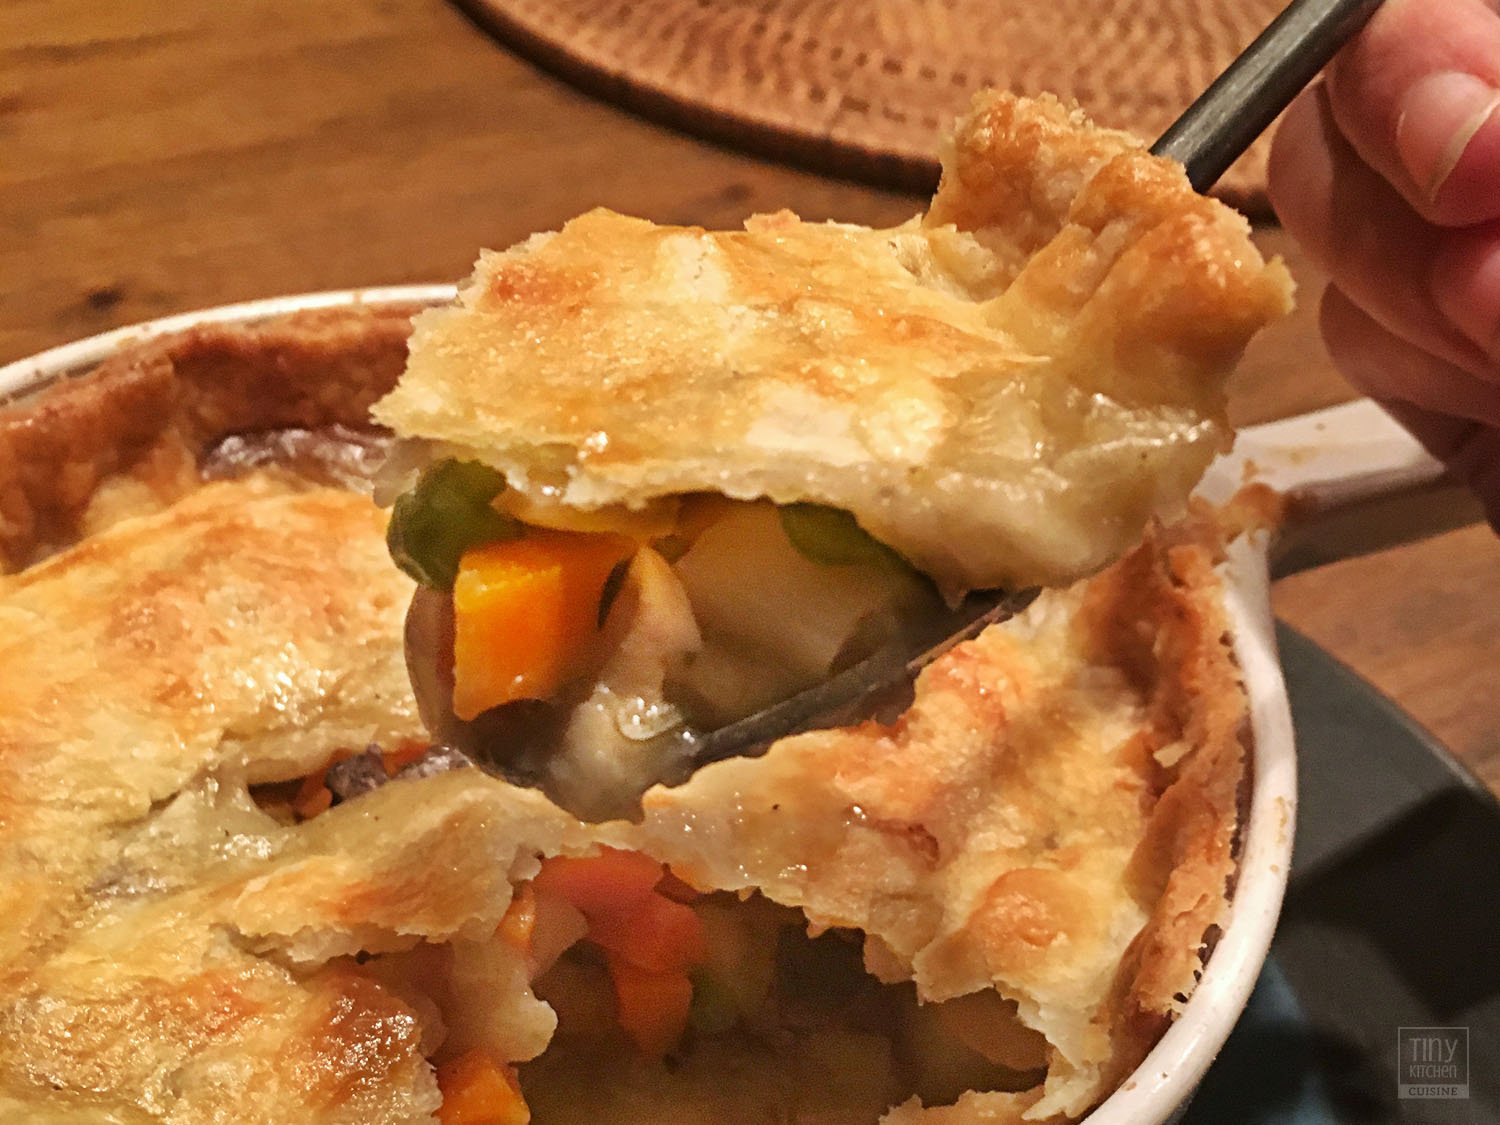 Filled with vegetables and vegetarian gravy, this vegetable pot pie is the ultimate vegetarian comfort food recipe! | Tiny Kitchen Cuisine | https://tiny.kitchen